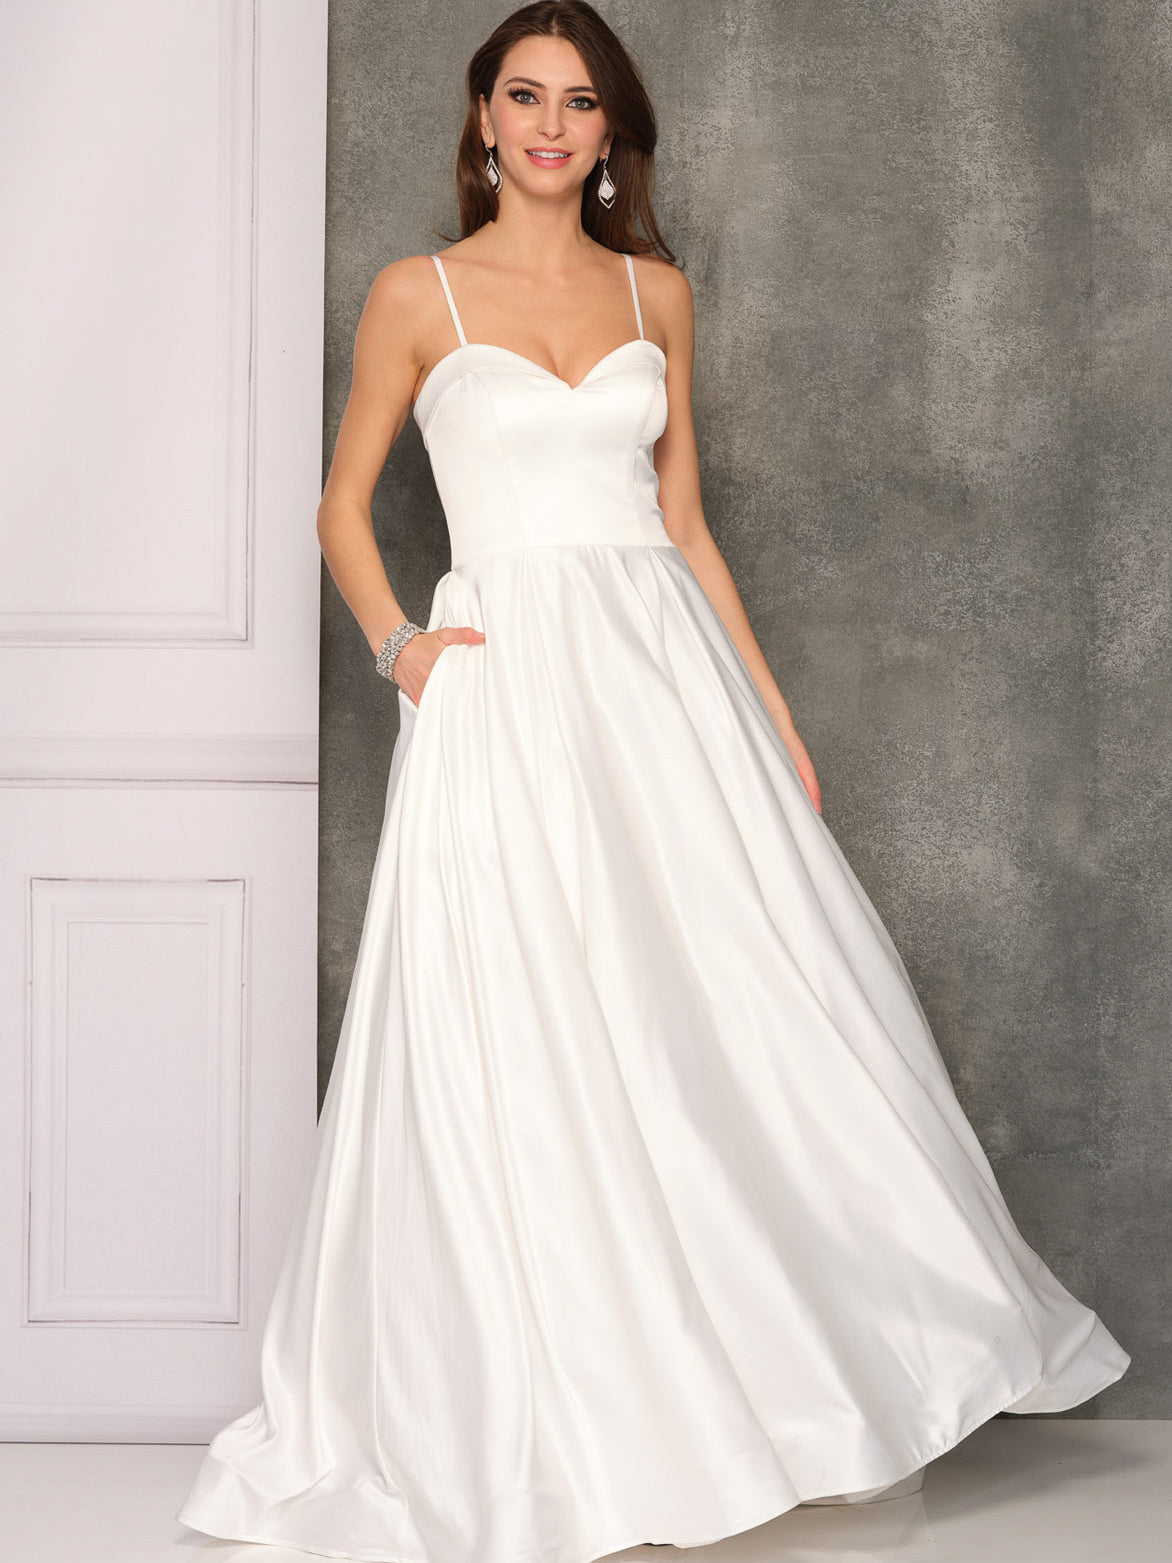 Spaghetti Strap -Deep sweetheart neckline open back wedding gown with –